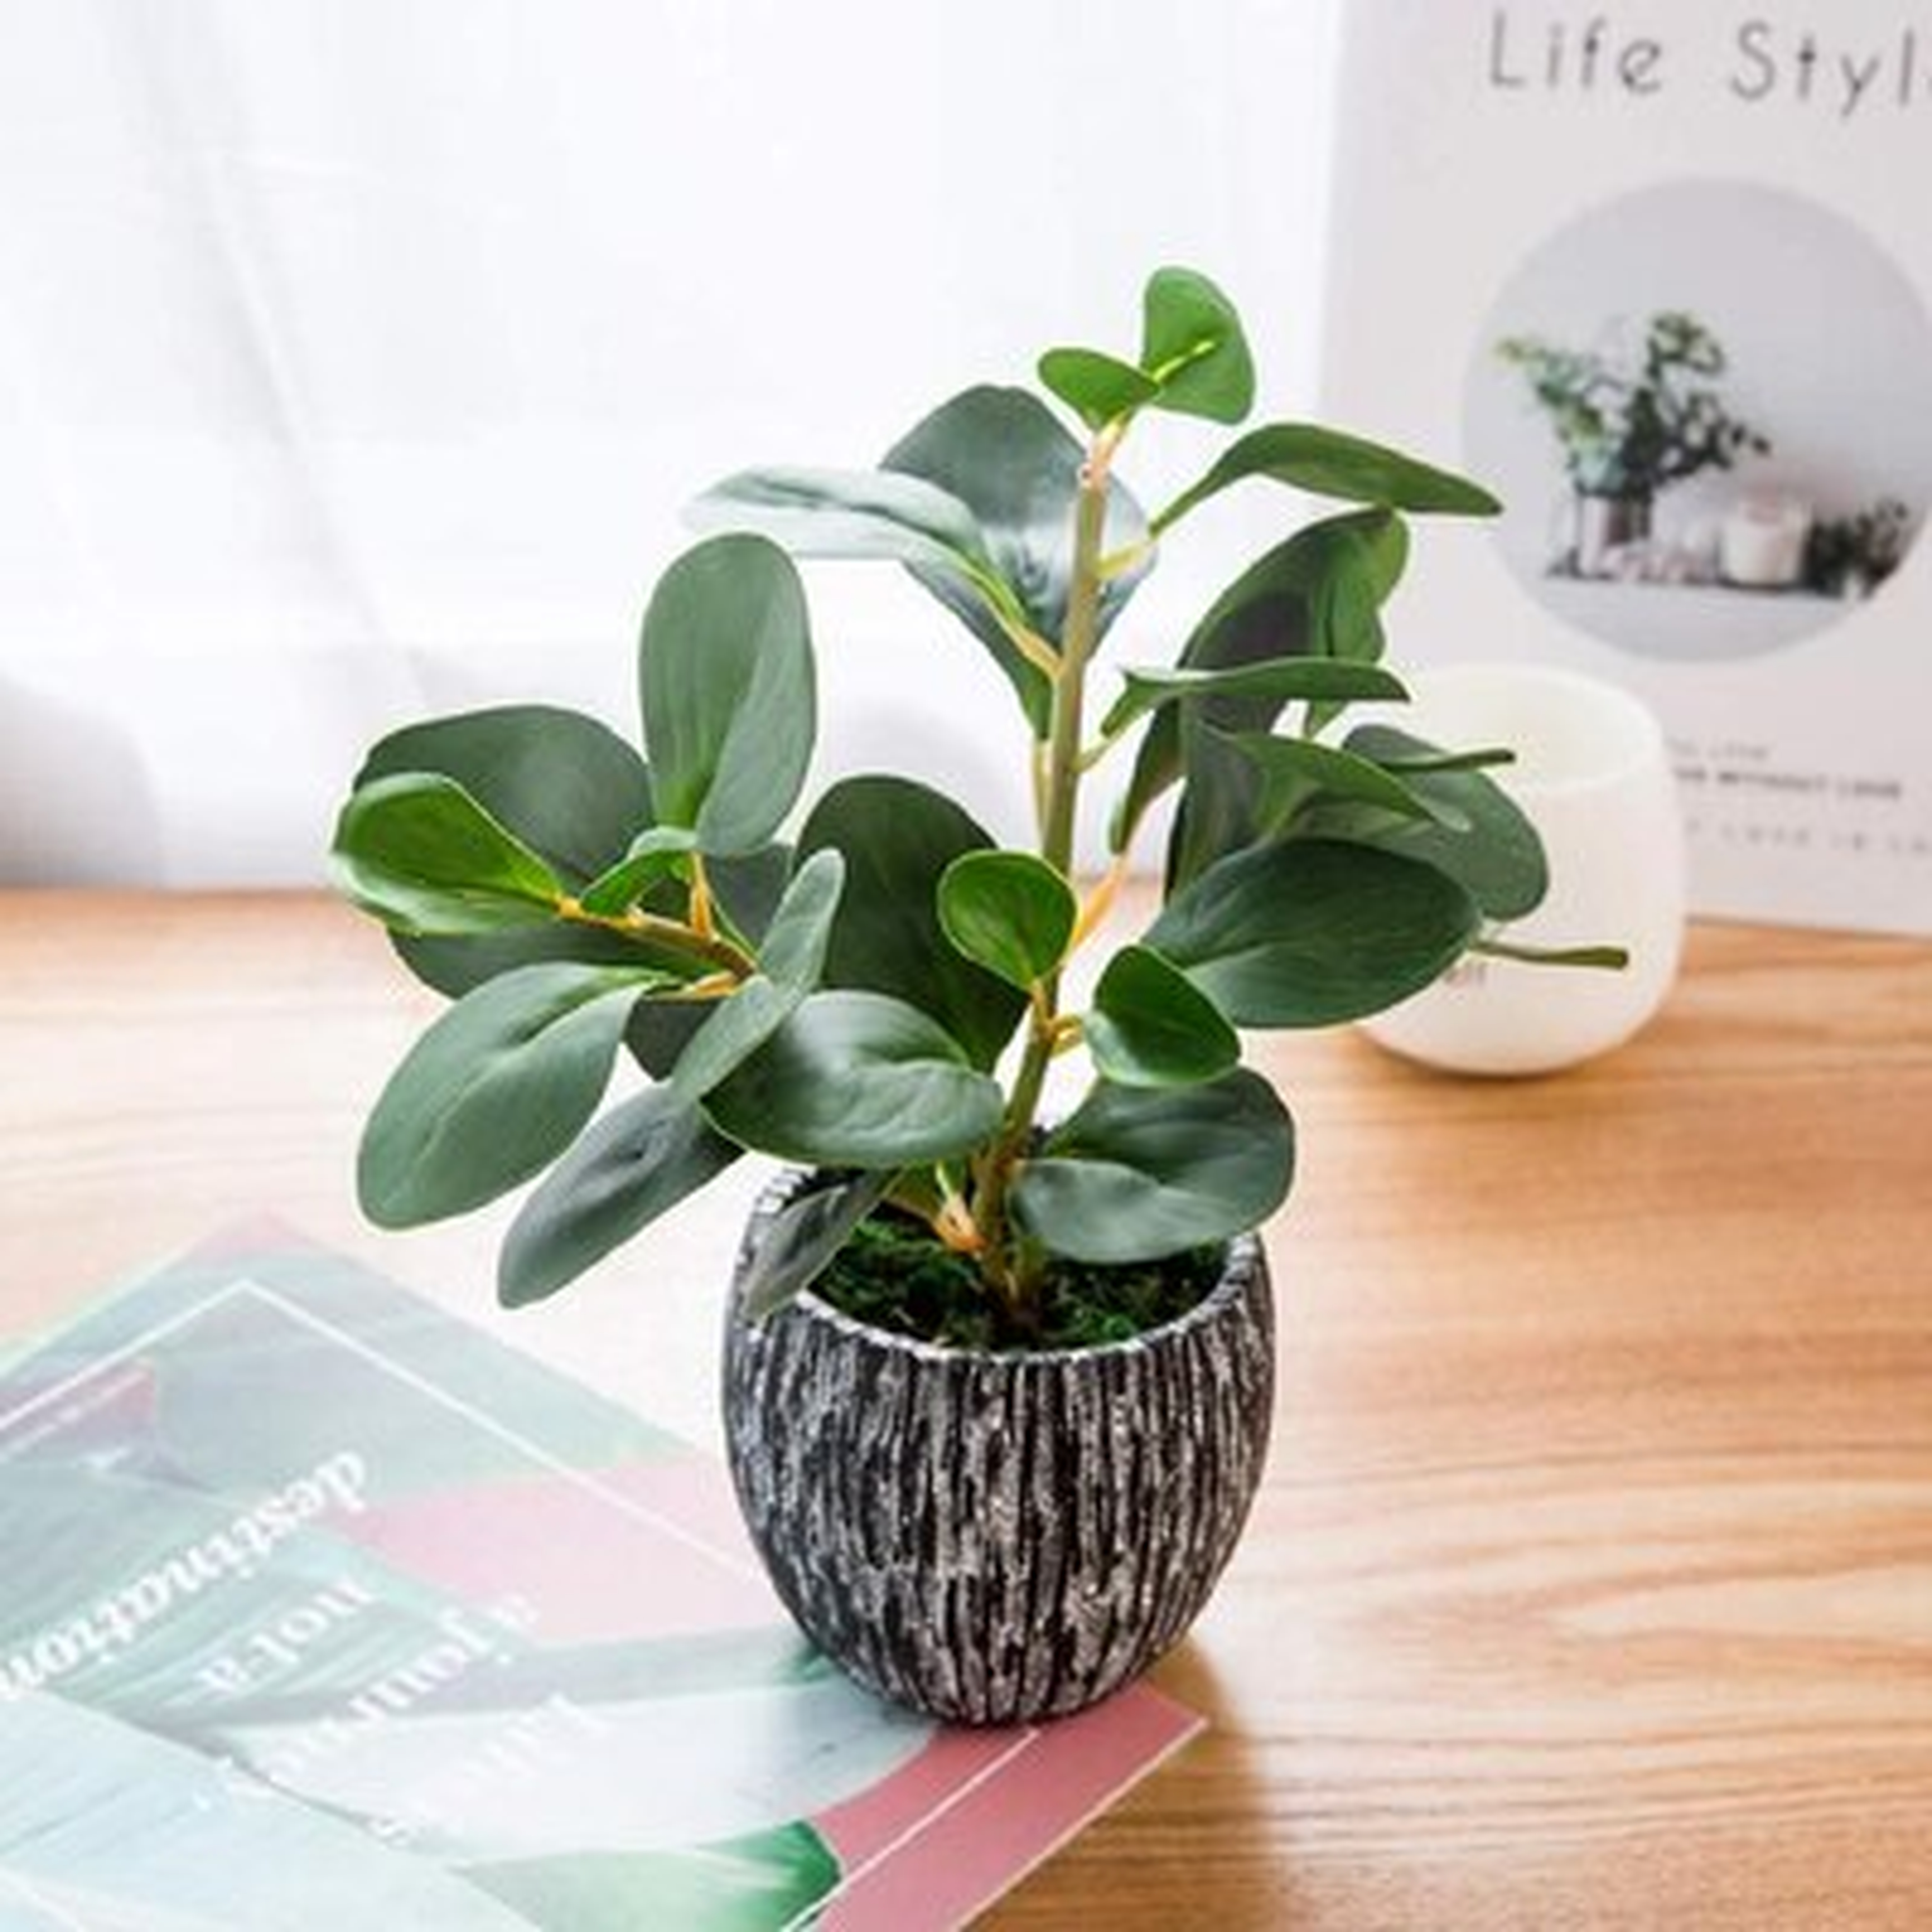 Small Potted Artificial Grass Plant For Home Kitchen Office Desk Decoration Plastic Life Like Fake Green Plants - Wayfair